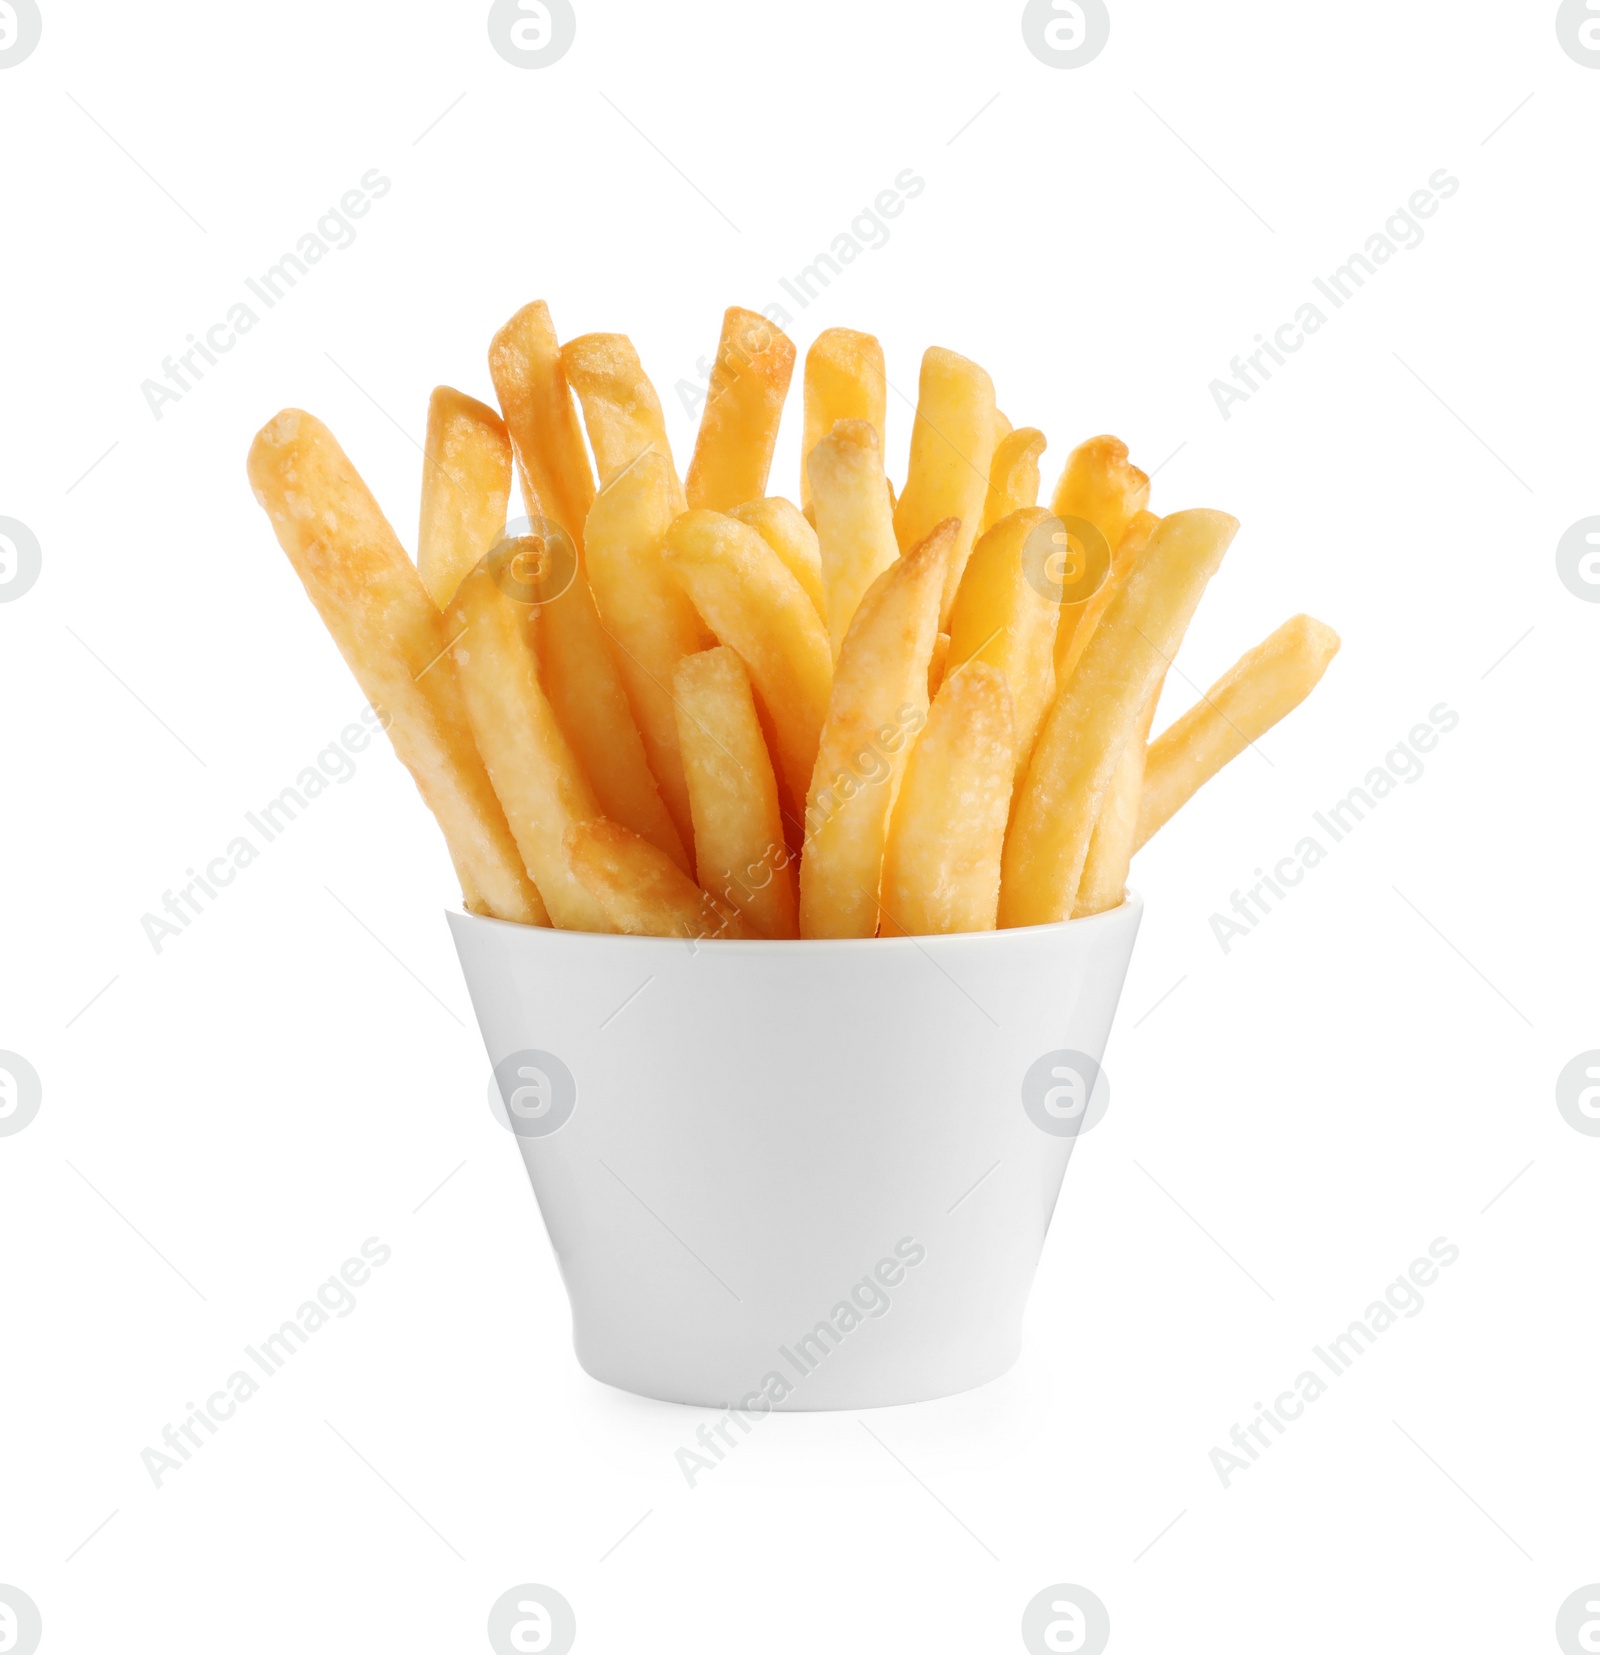 Photo of Bowl of delicious french fries on white background